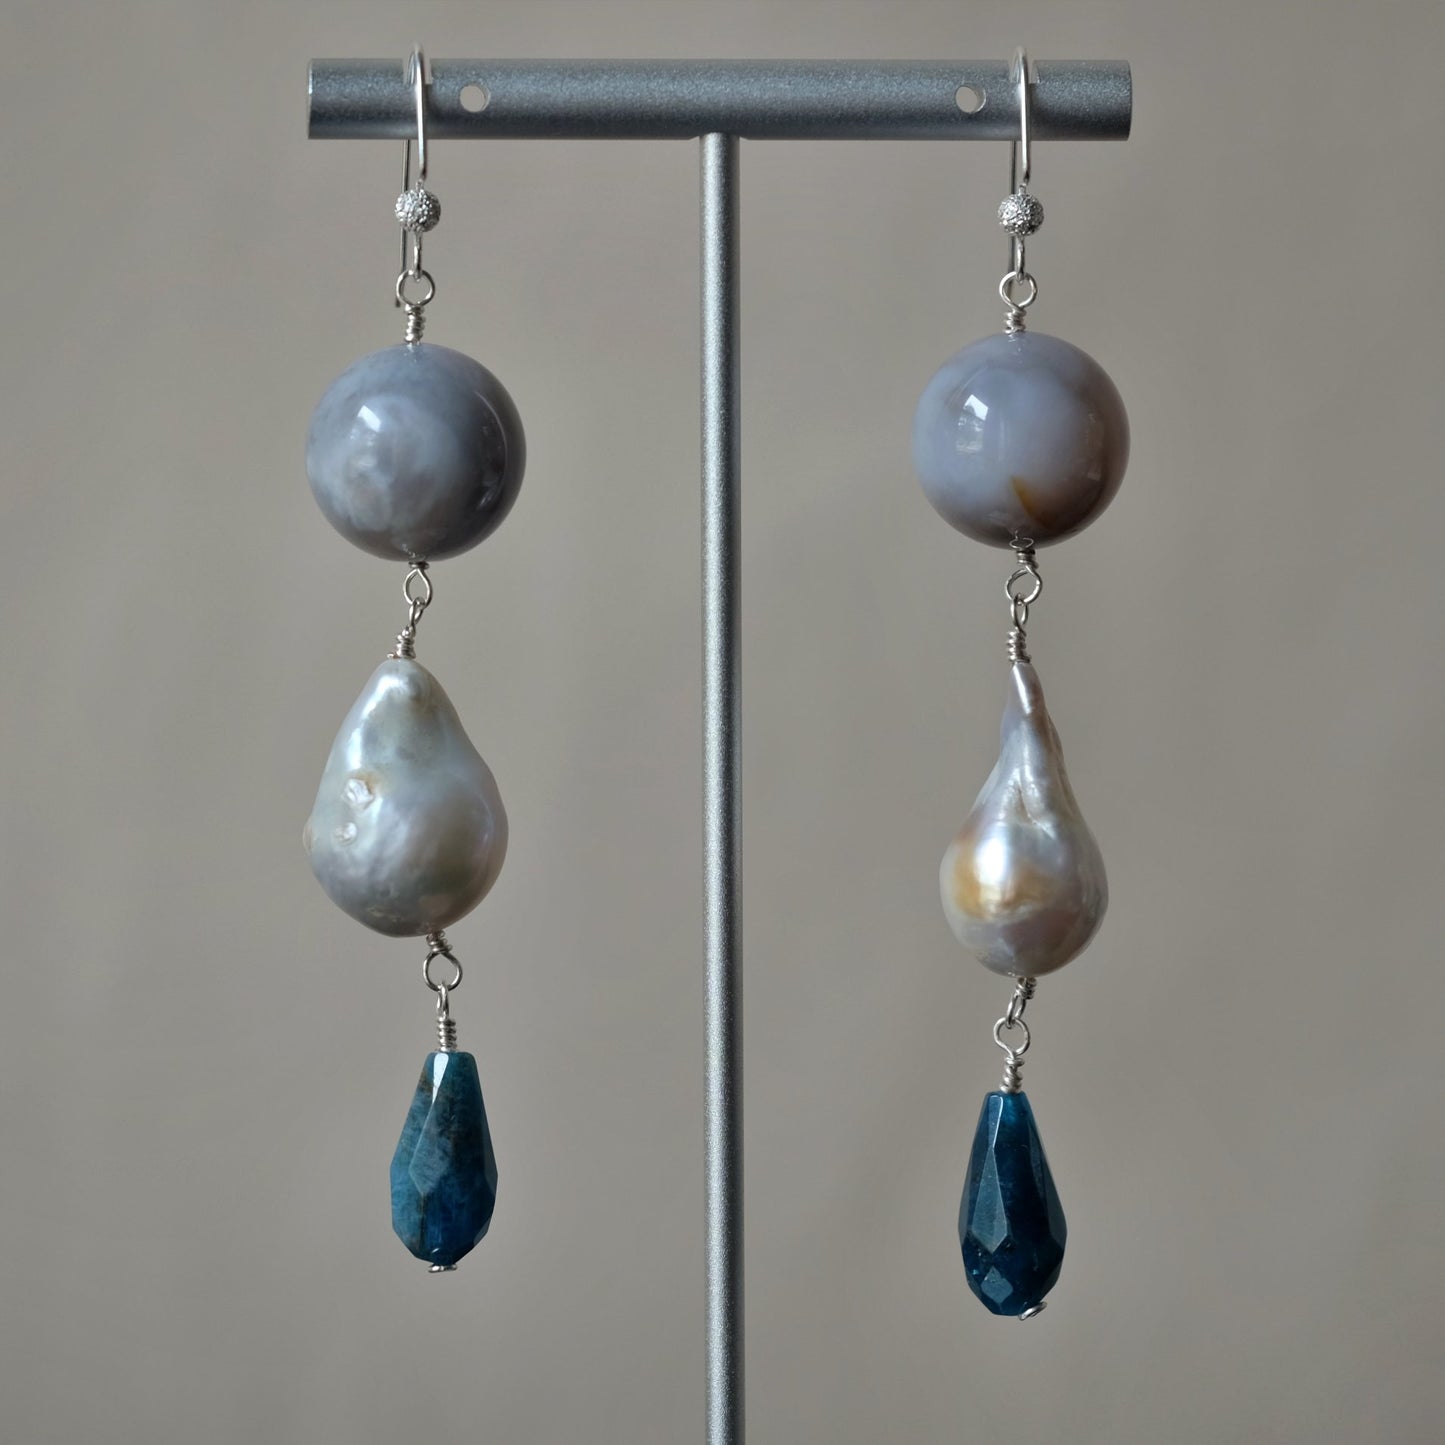 Large Dangle Earrings with Apatite, Pearl and Agate